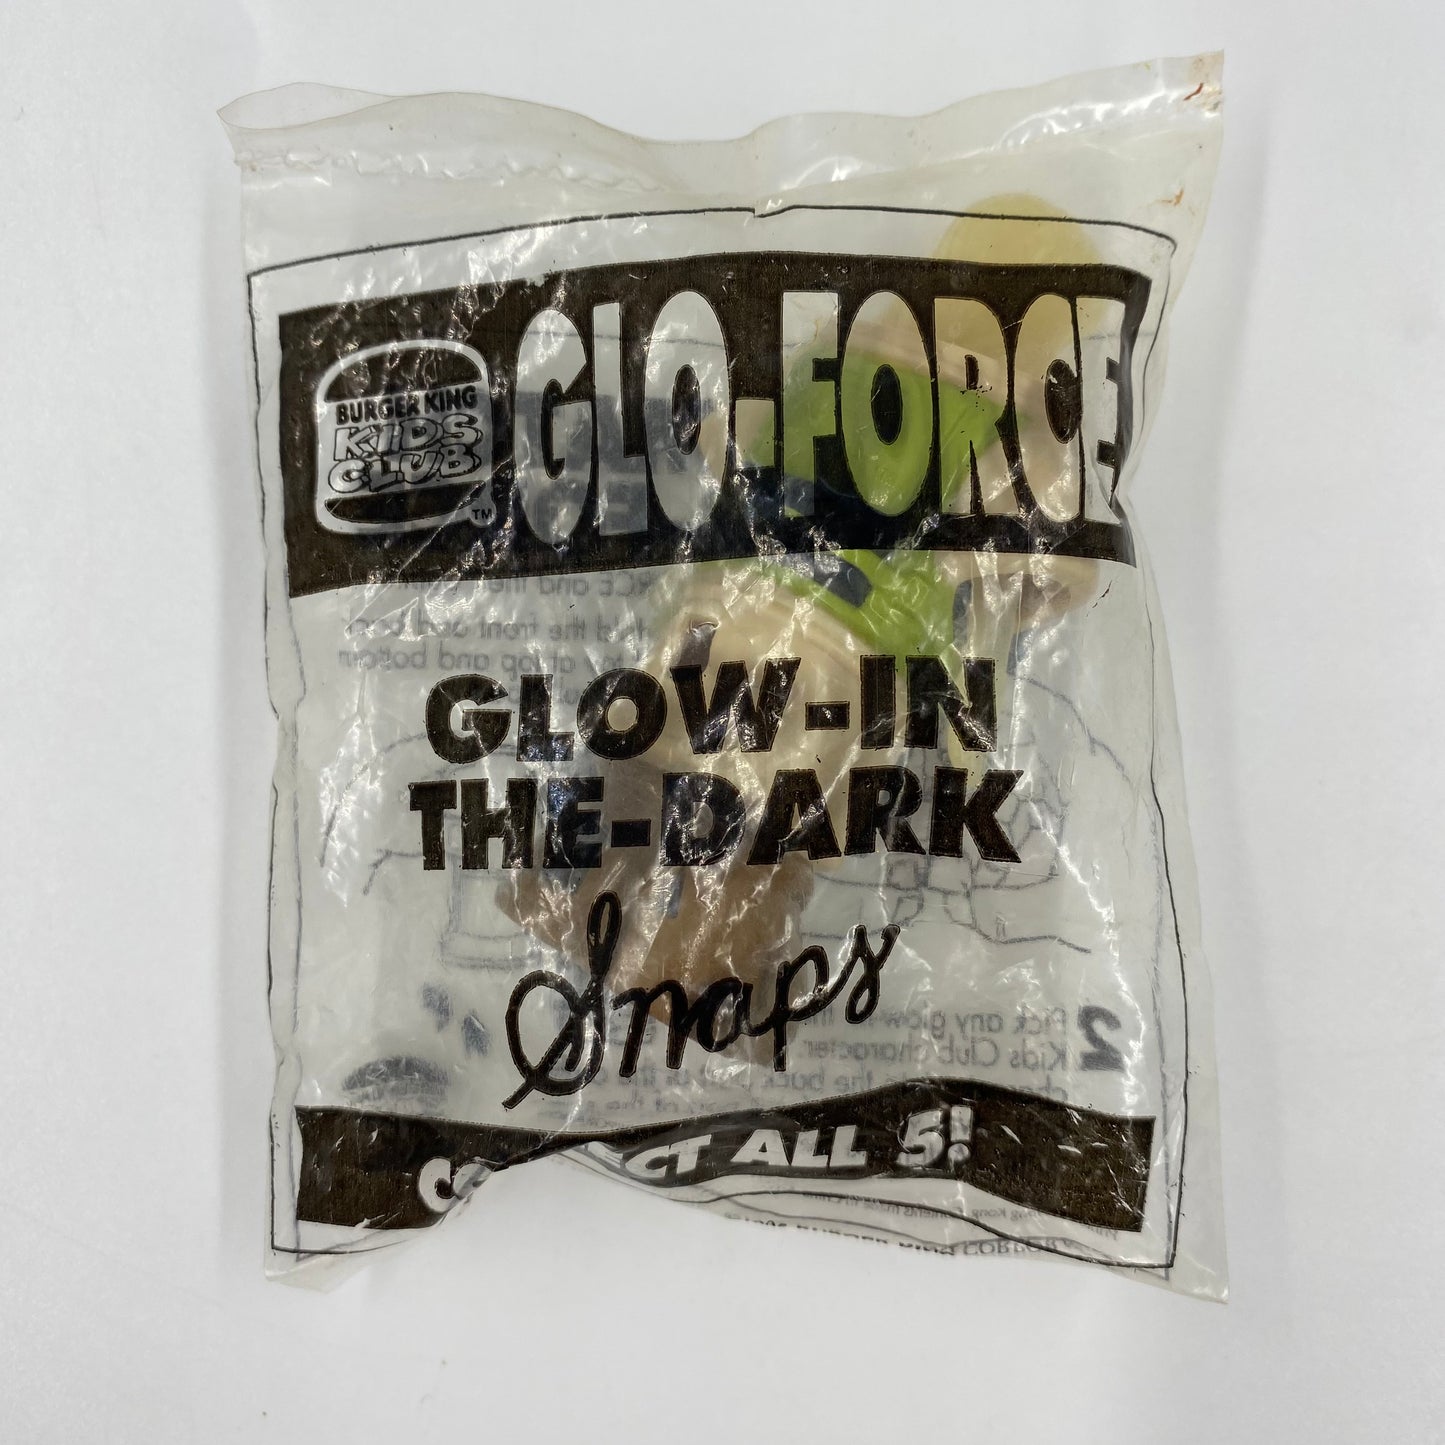 Glo-Force Snaps Burger King Kids' Meal toy (1996) bagged